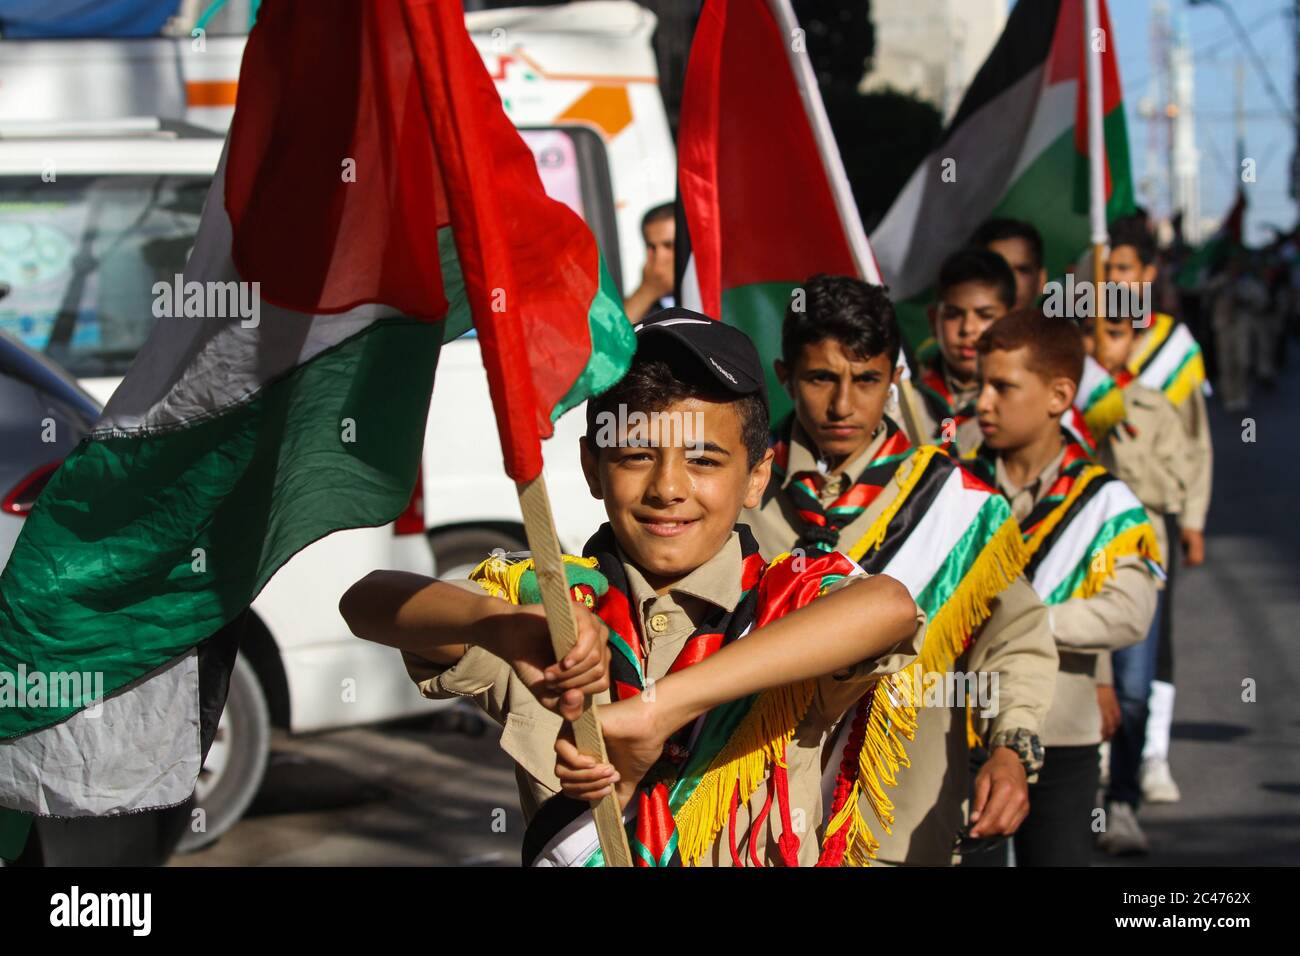 June 24, 2020: Gaza, Palestine. 24 June 2020. Different groups of the local scout association attend a rally in Gaza City to reject the Israeli government's plan to annex parts of the West Bank. Israeli prime Minister Netanyahu, backed by US president Trump, is planning to confiscate territories in the West Bank containing Israeli settlements as well as the Jordan valley, incorporating up to 30% of the Palestinian territories into Israel. The plan on land annexation has been opposed by more than 1,000 parliamentarians from across Europe, who have signed a letter strongly condemning the move Stock Photo